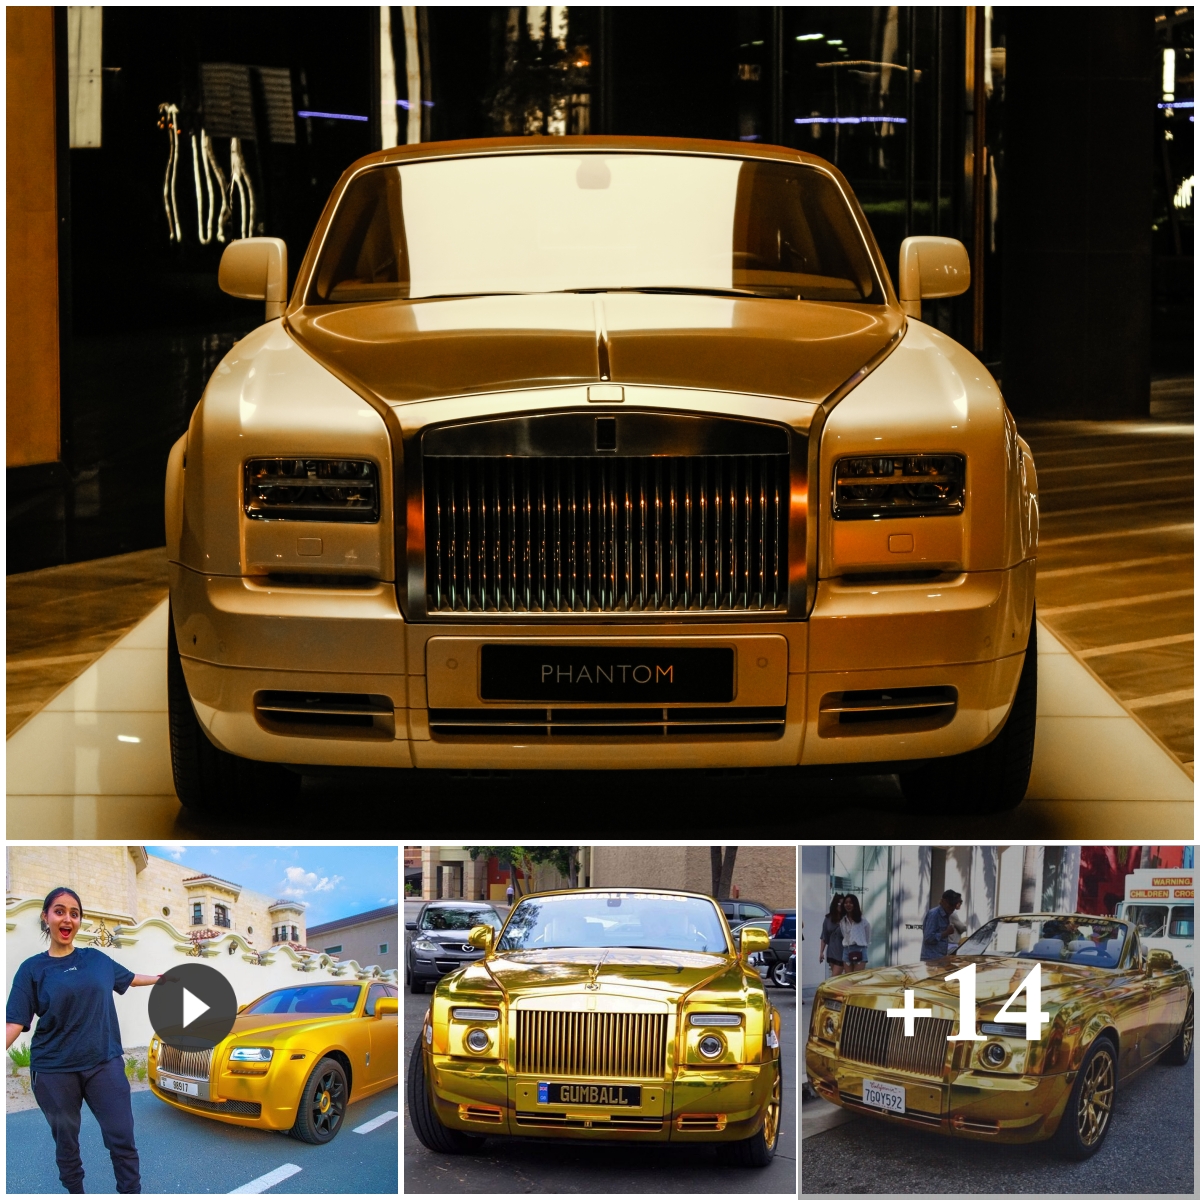 The Epitome of Luxury: The Gold Rolls-Royce